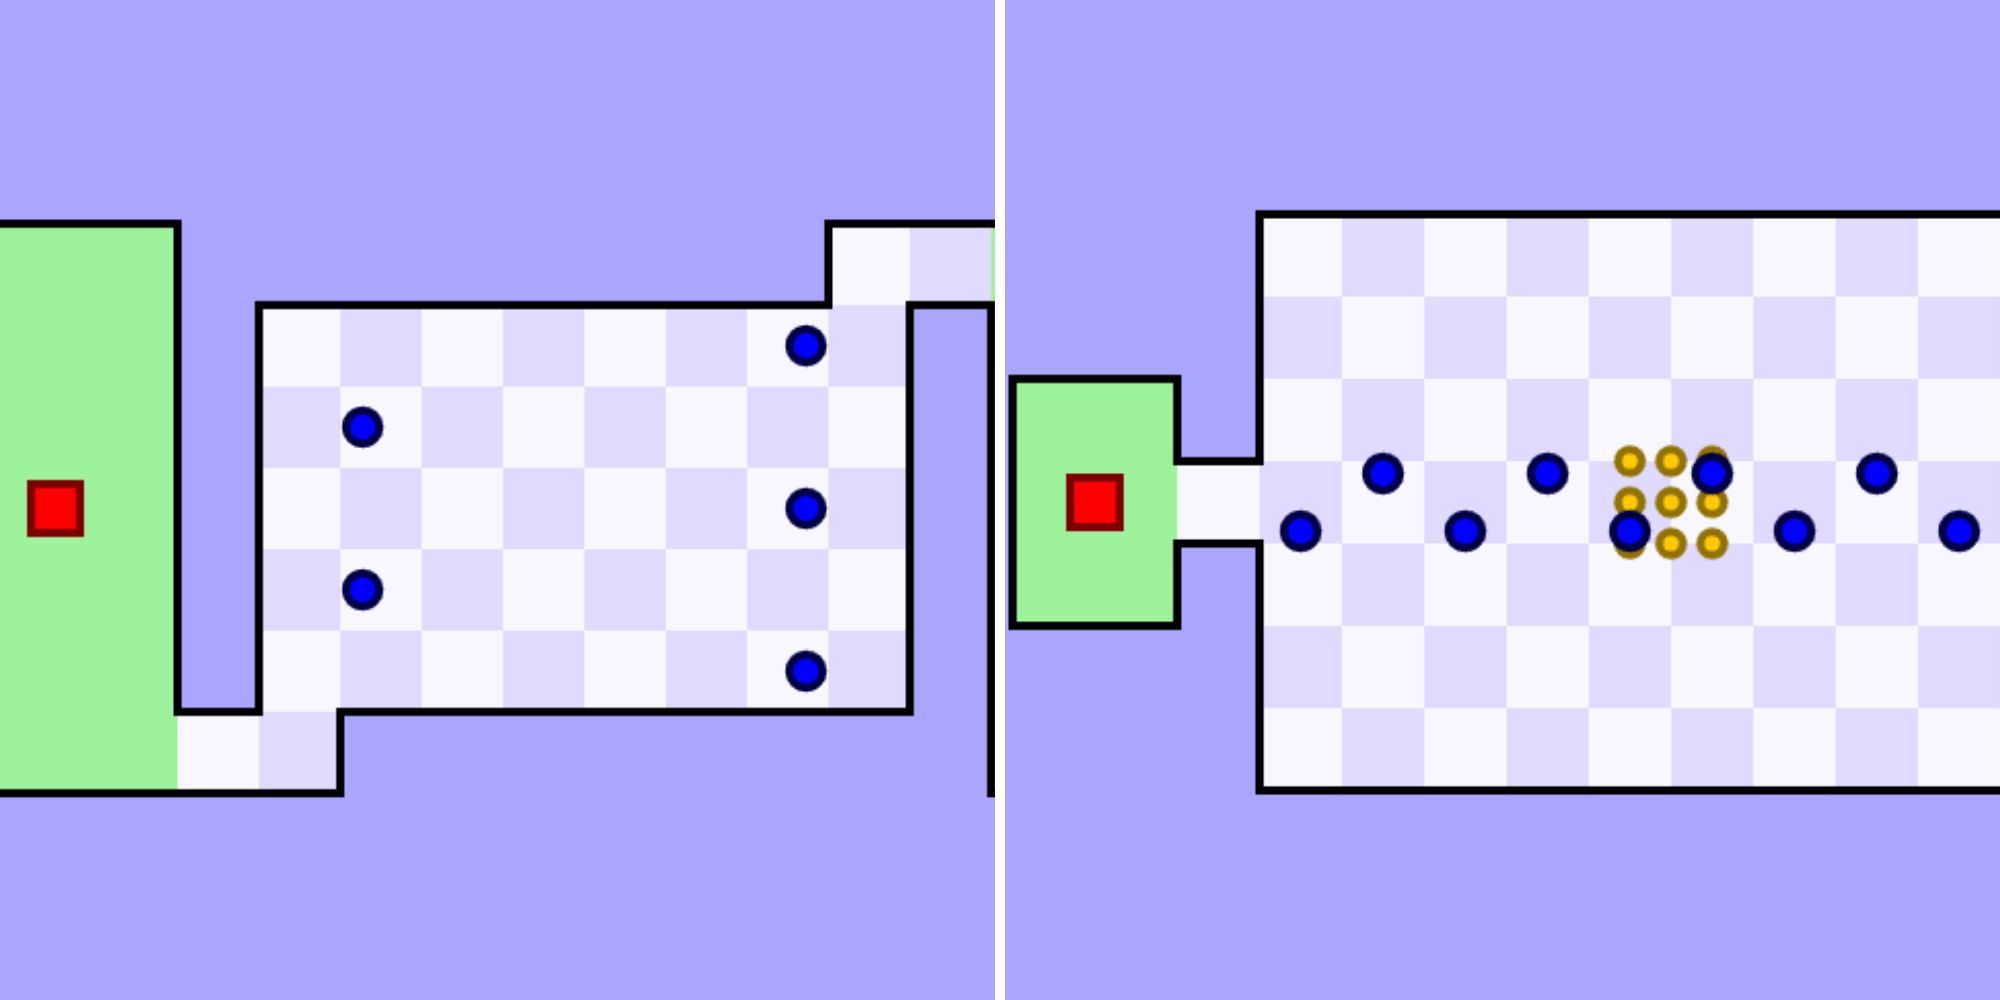 A split image of a simple, 2D, top-down perspective of a red square, multiple blue dots, and a checkered floor.